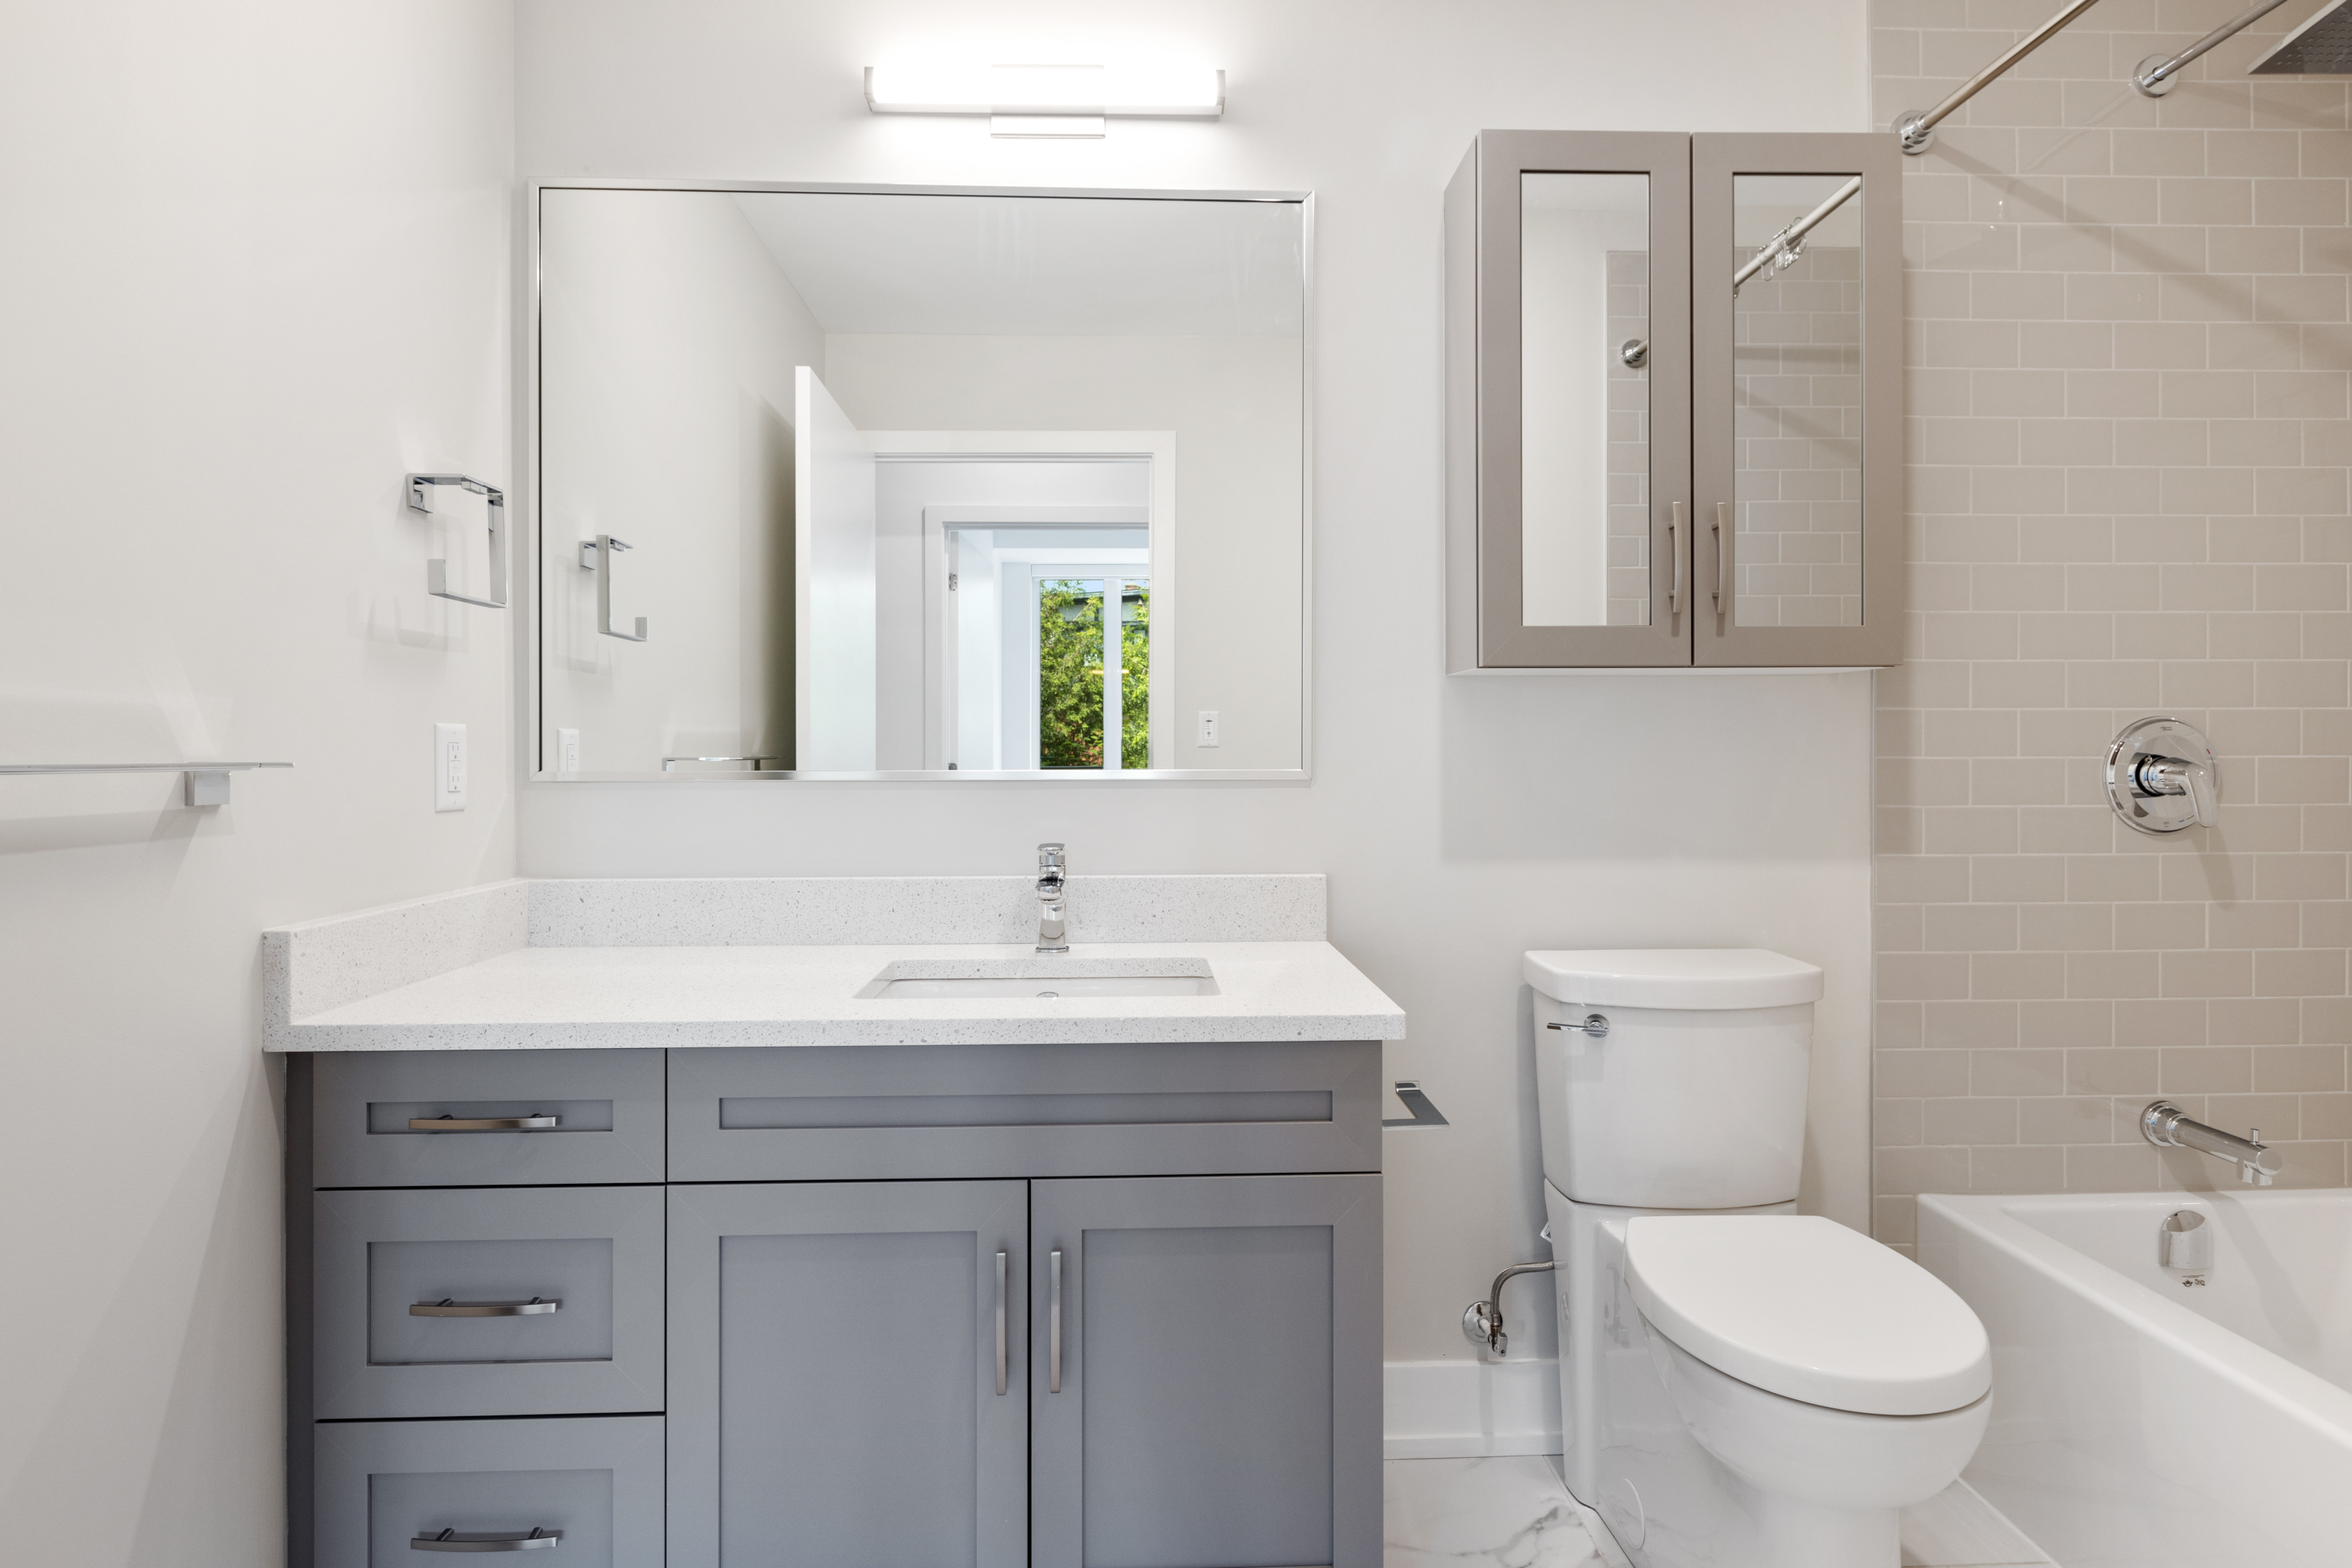 Cost For a One-Day Bathroom Makeover